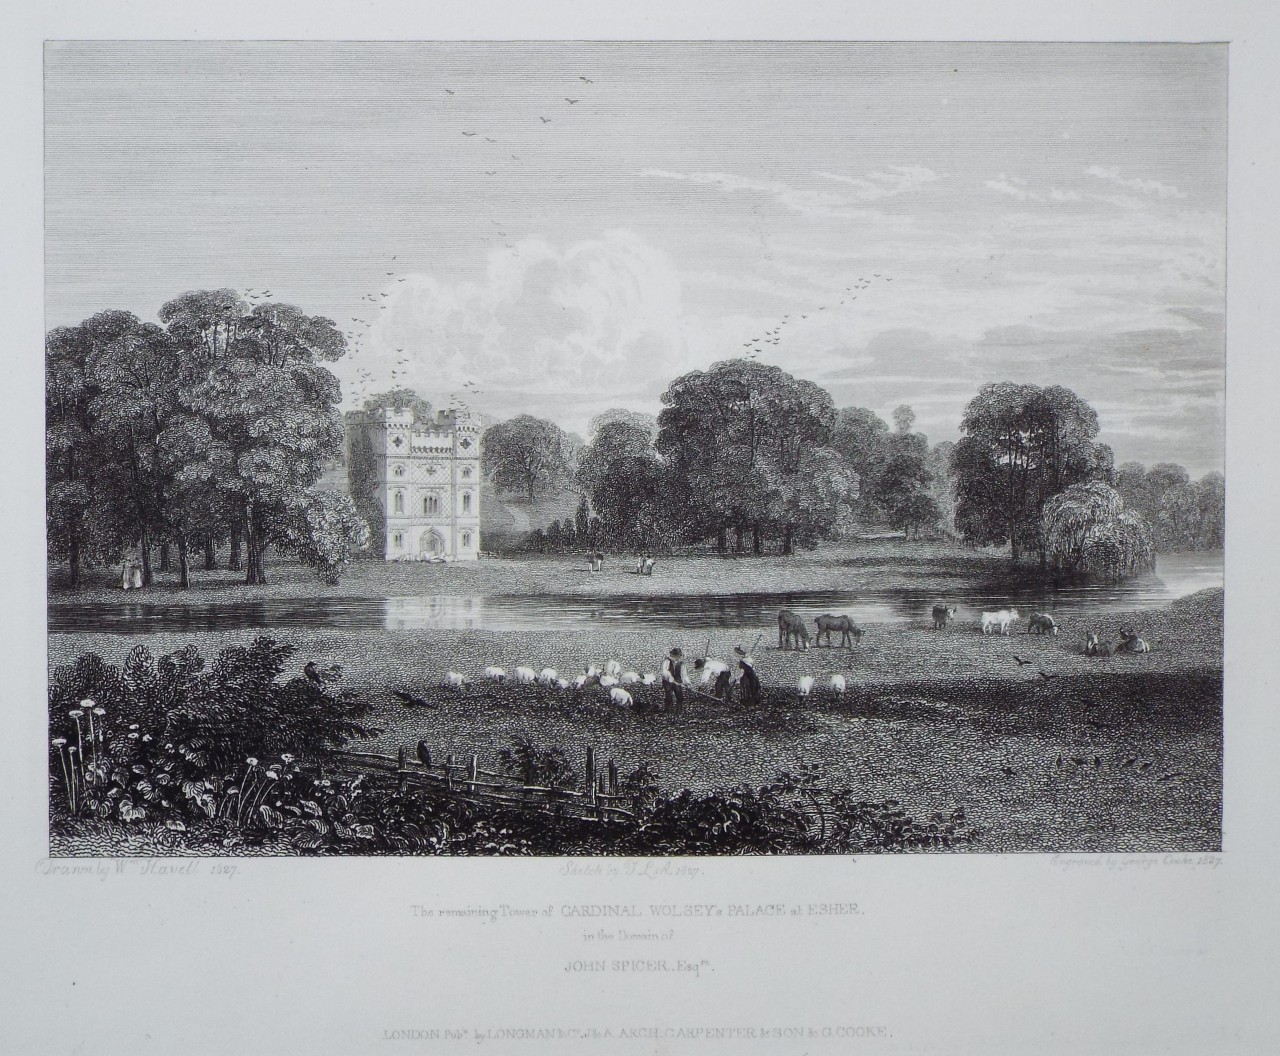 Print - The Remaining Tower of Cardinal Wolsey's Palace at Esher. In the domain of John Spicer Esqr. - Cooke